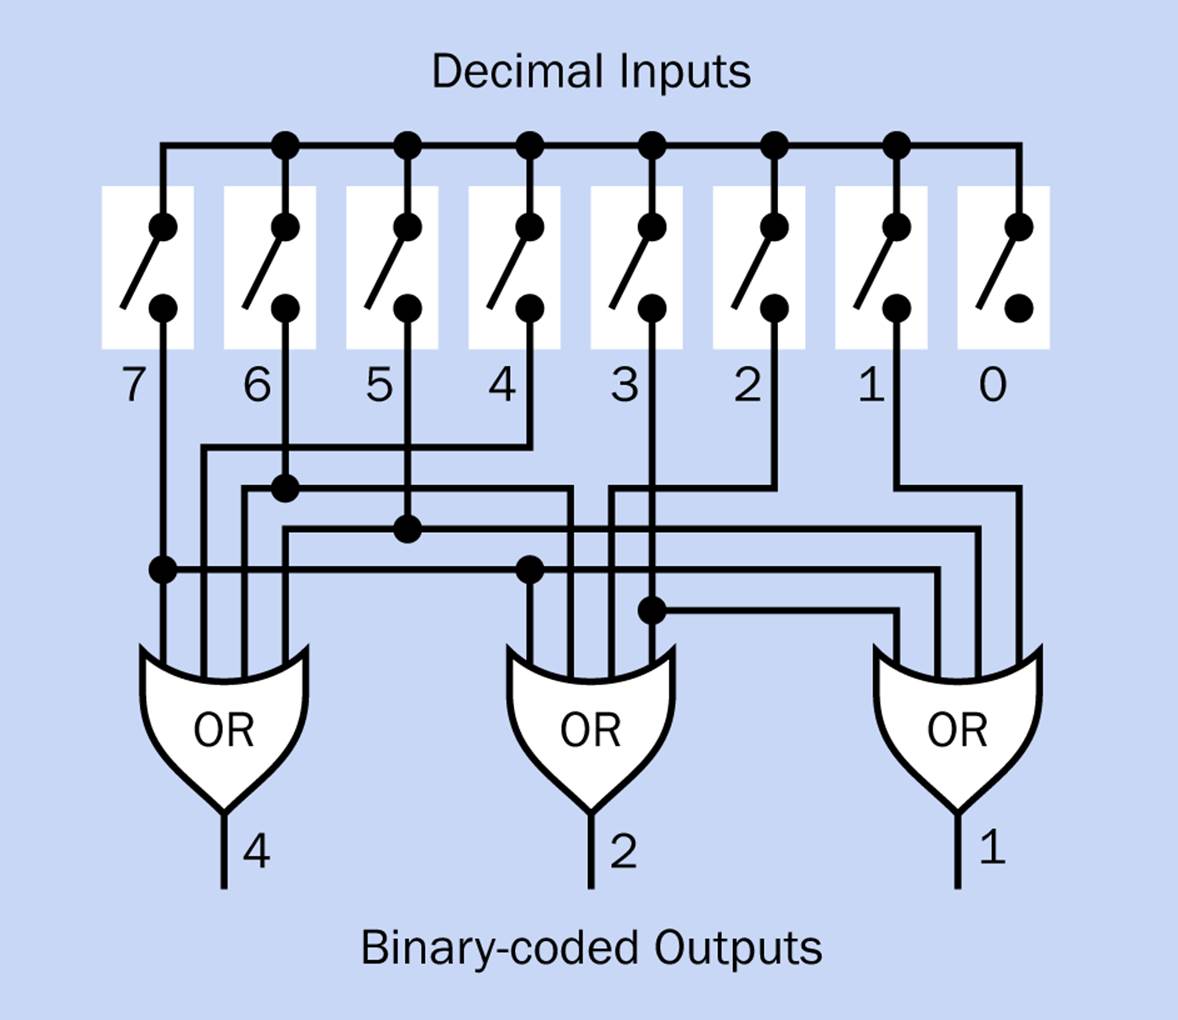 Three four-input OR gates are all you need to emulate the behavior of an 8-to-3 bit encoder chip. Pulldown resistors (not shown here) would be added to the output of each switch.